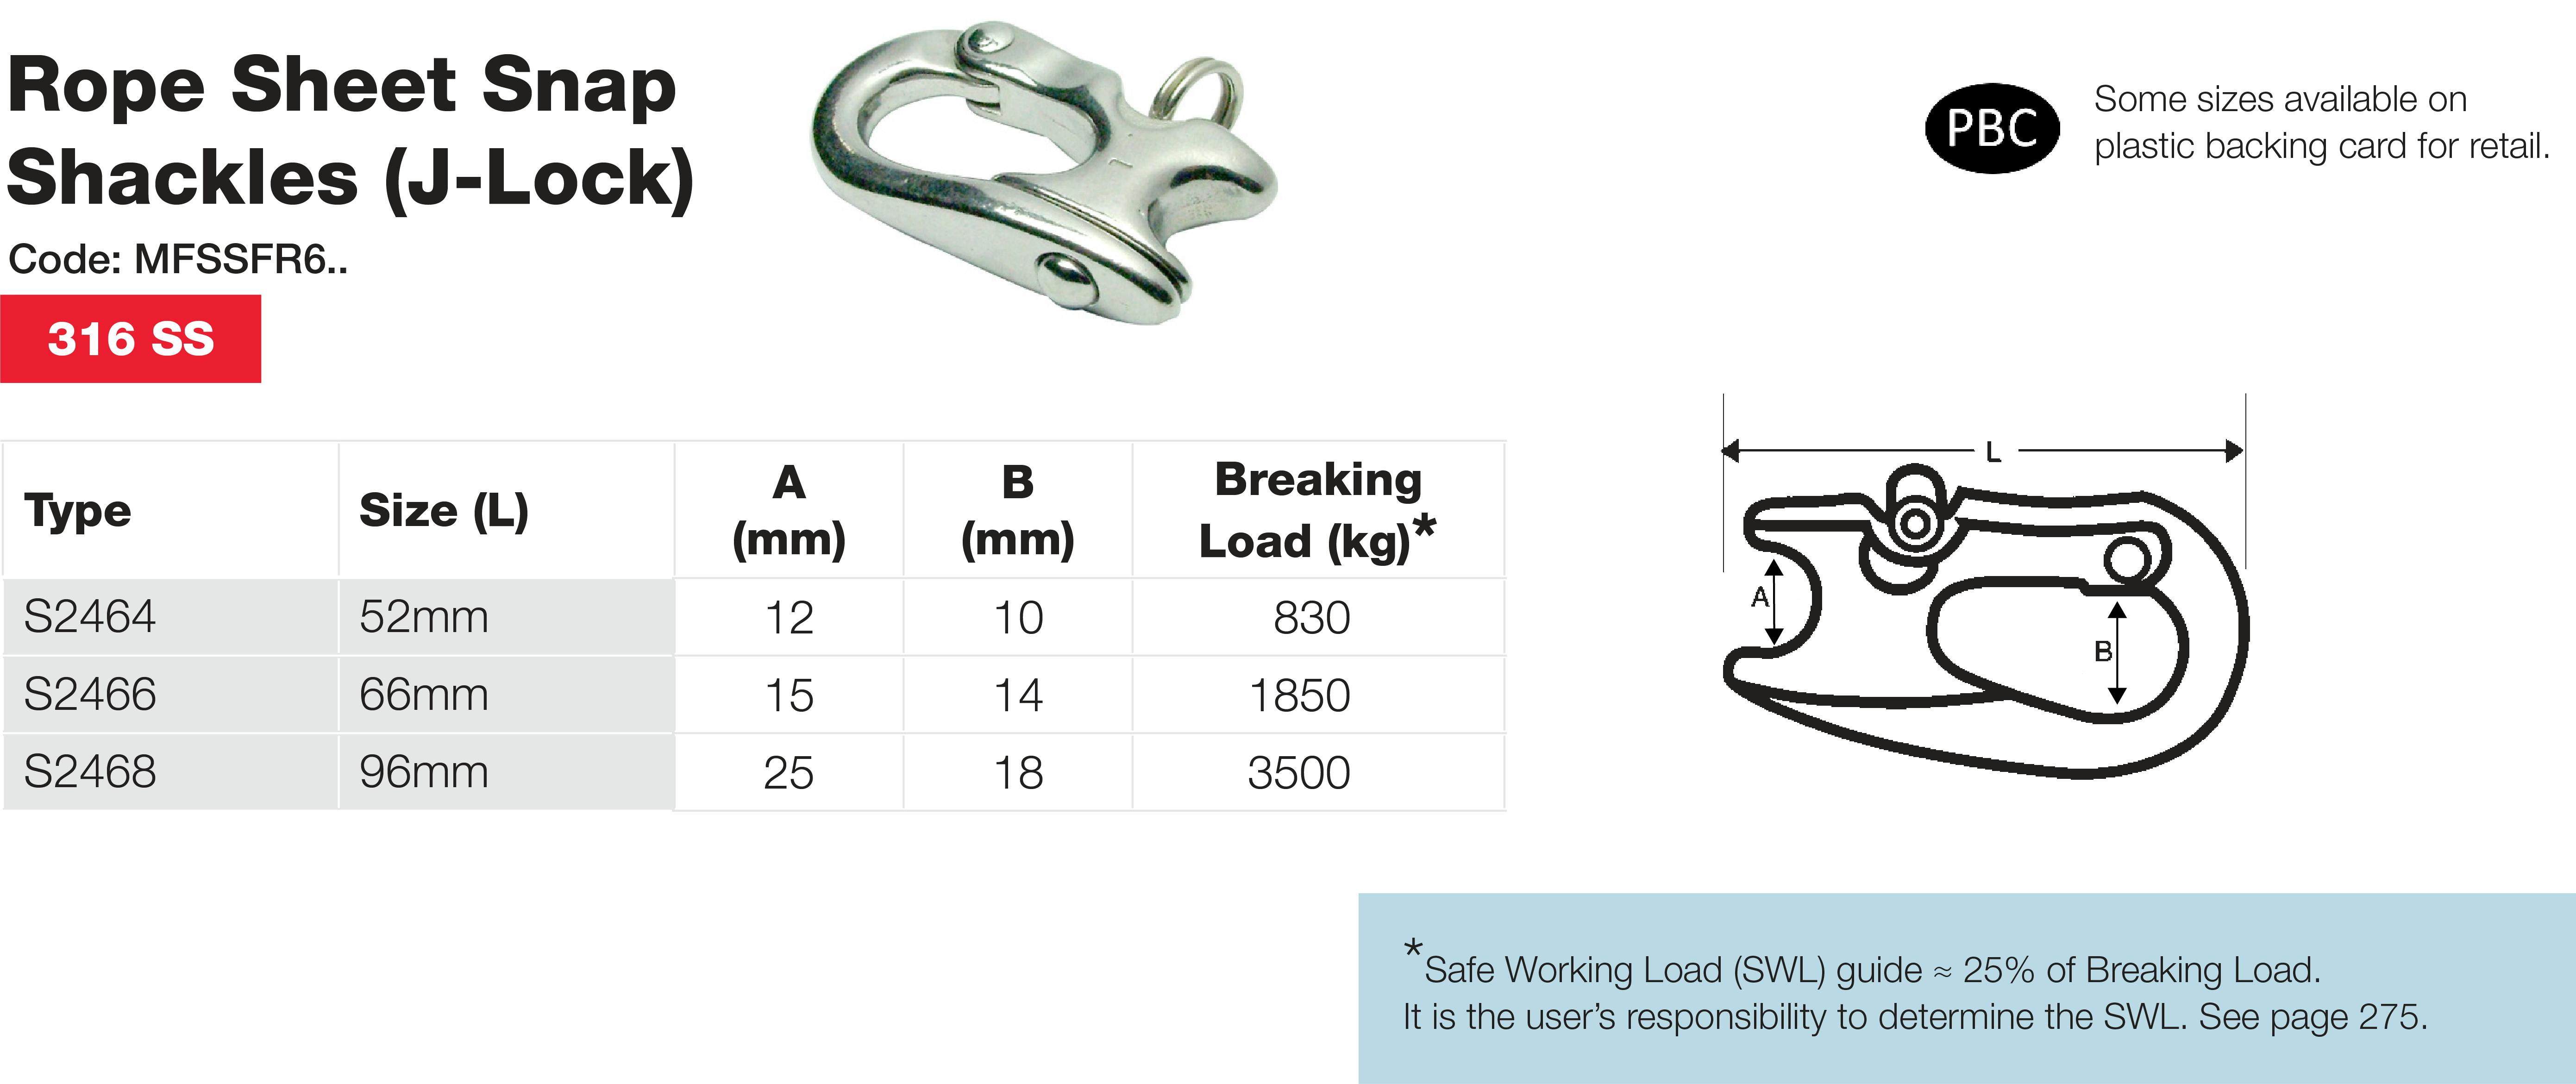 Stainless Marine Rope Sheet Snap Shackle Performance Data